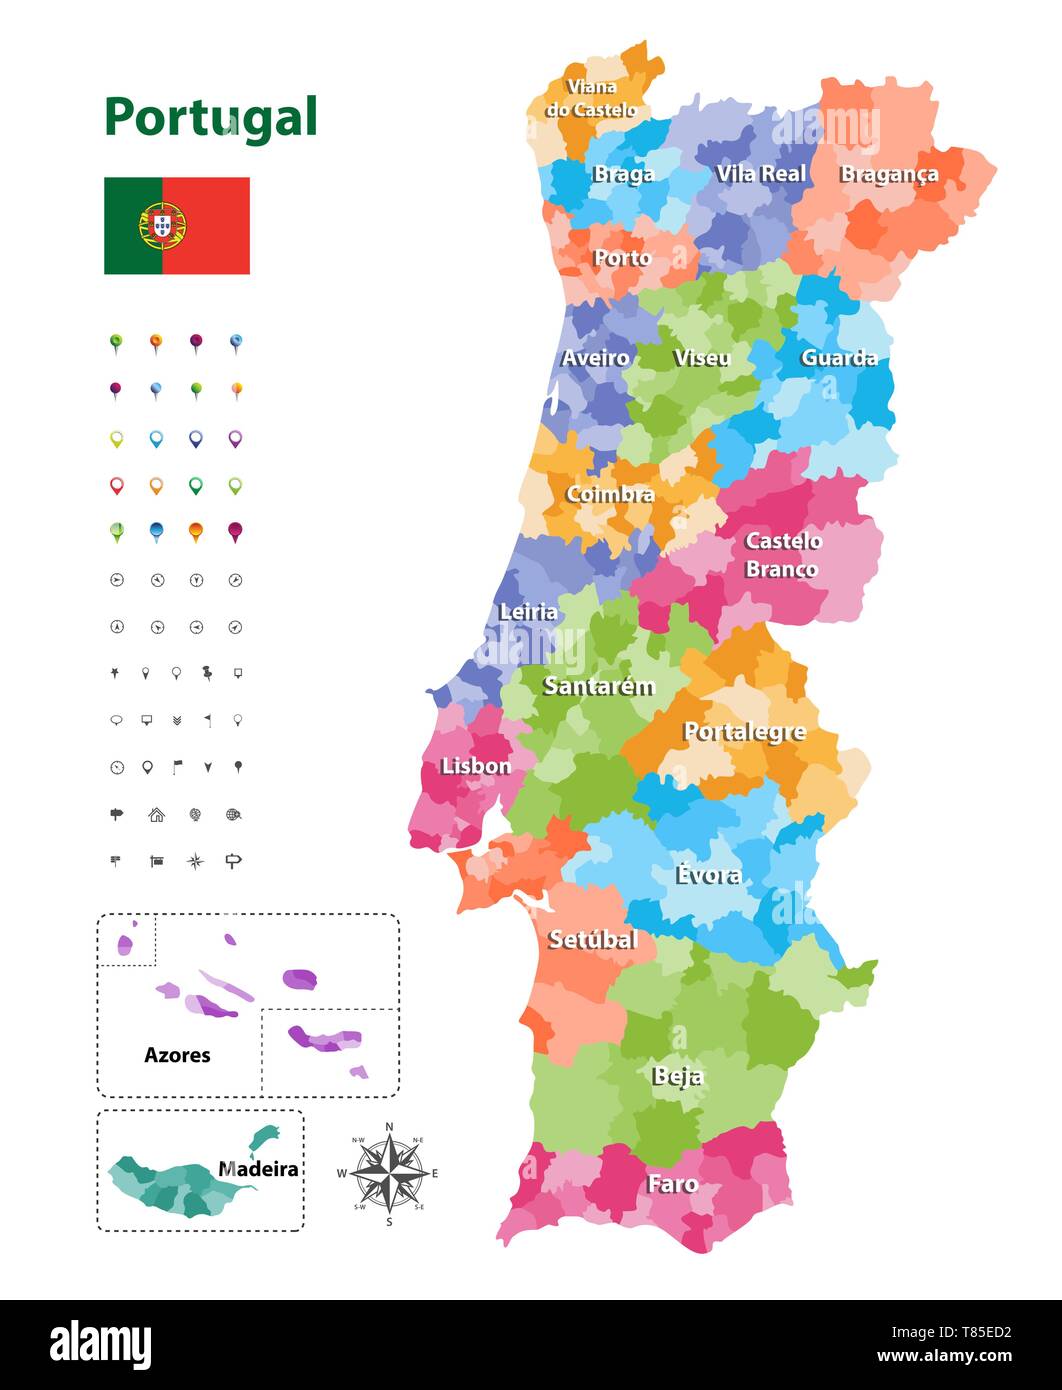 vector map of Portugal districts and autonomous regions, subdivided into municipalities Stock Vector